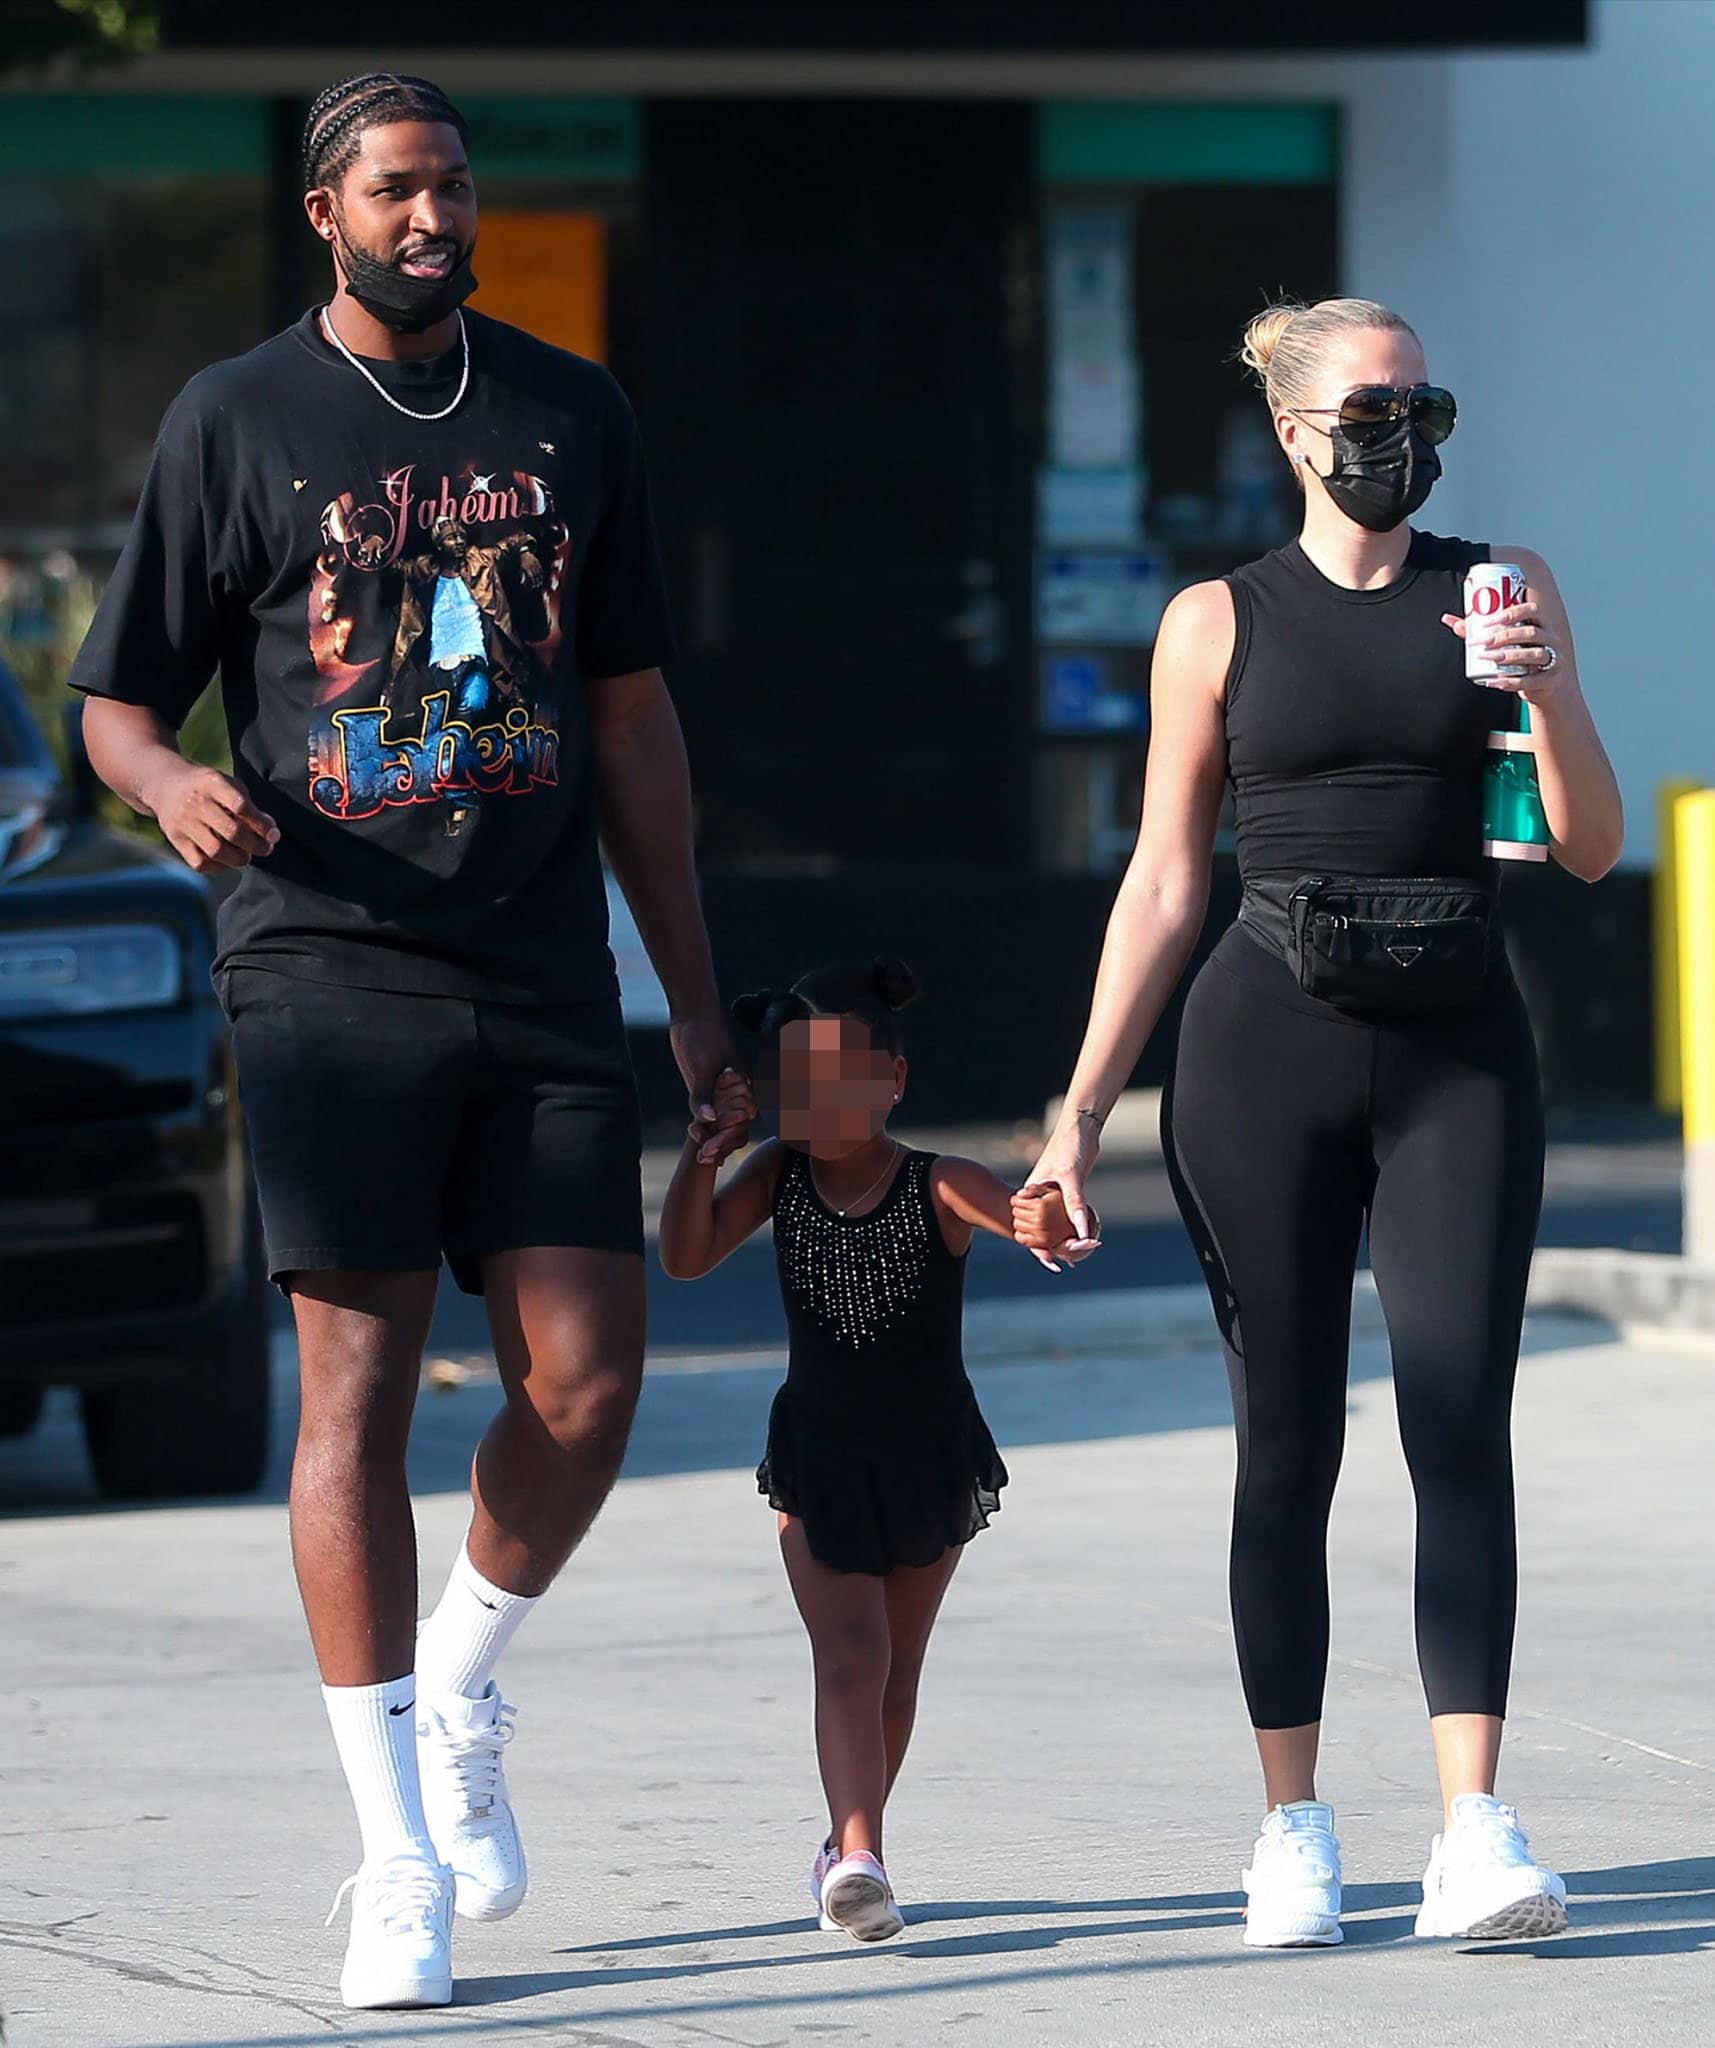 Khloe Kardashian revealed that Tristan Thompson's paternity scandal will be featured in their upcoming Hulu series The Kardashians